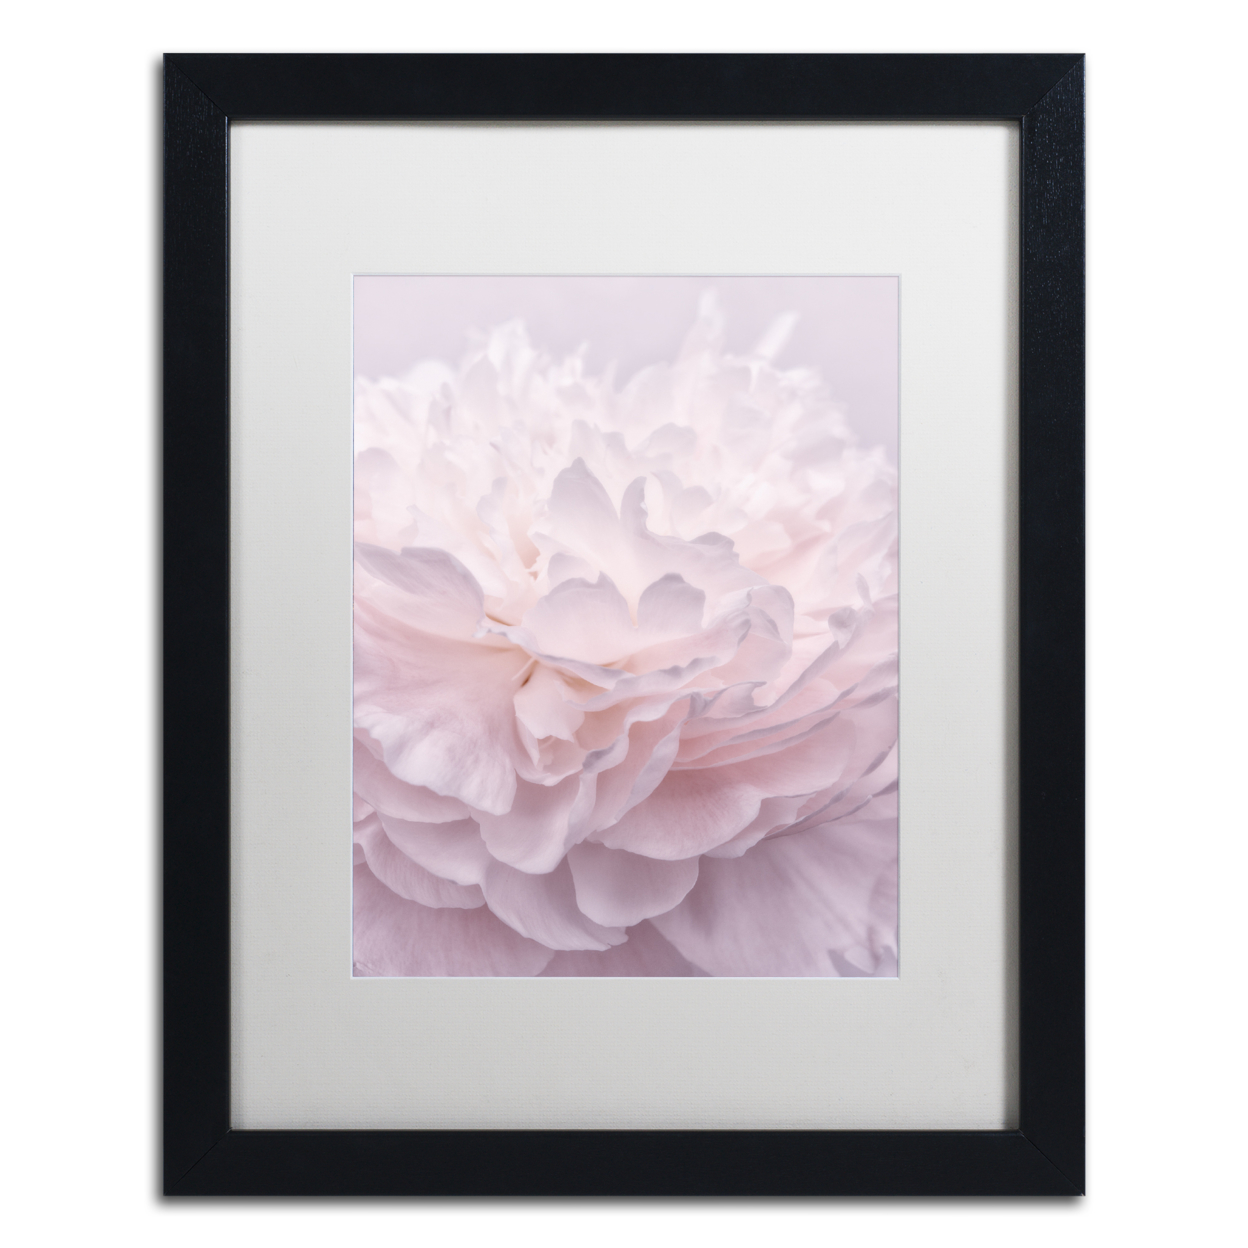 Cora Niele 'Pink Peony Petals I' Black Wooden Framed Art 18 X 22 Inches